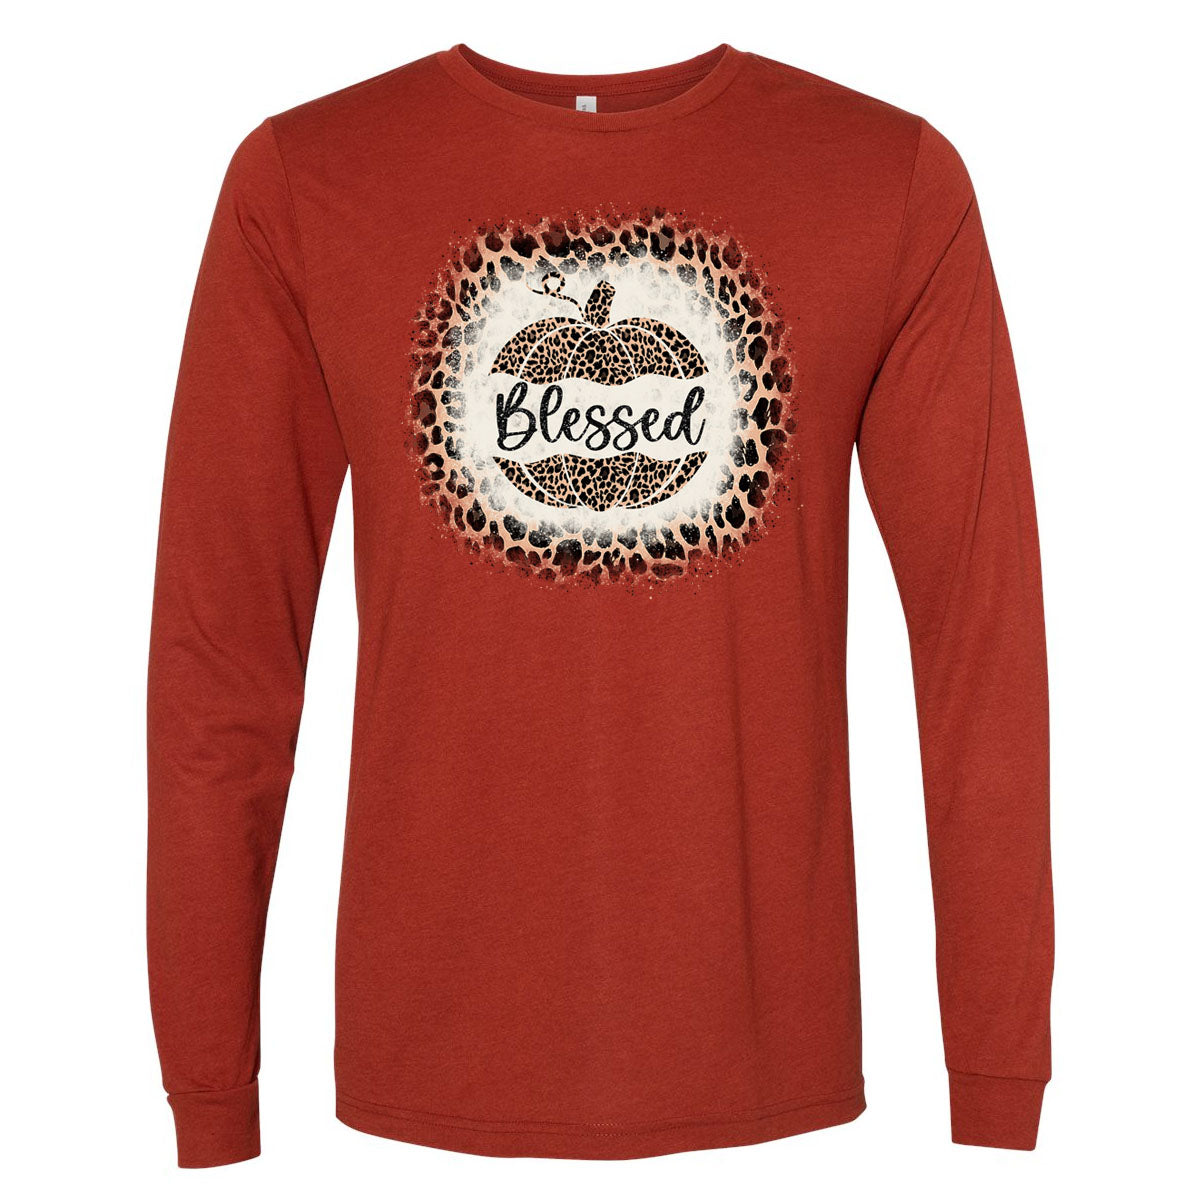 Blessed in  Leopard  - Brick Triblend Tee - Southern Grace Creations